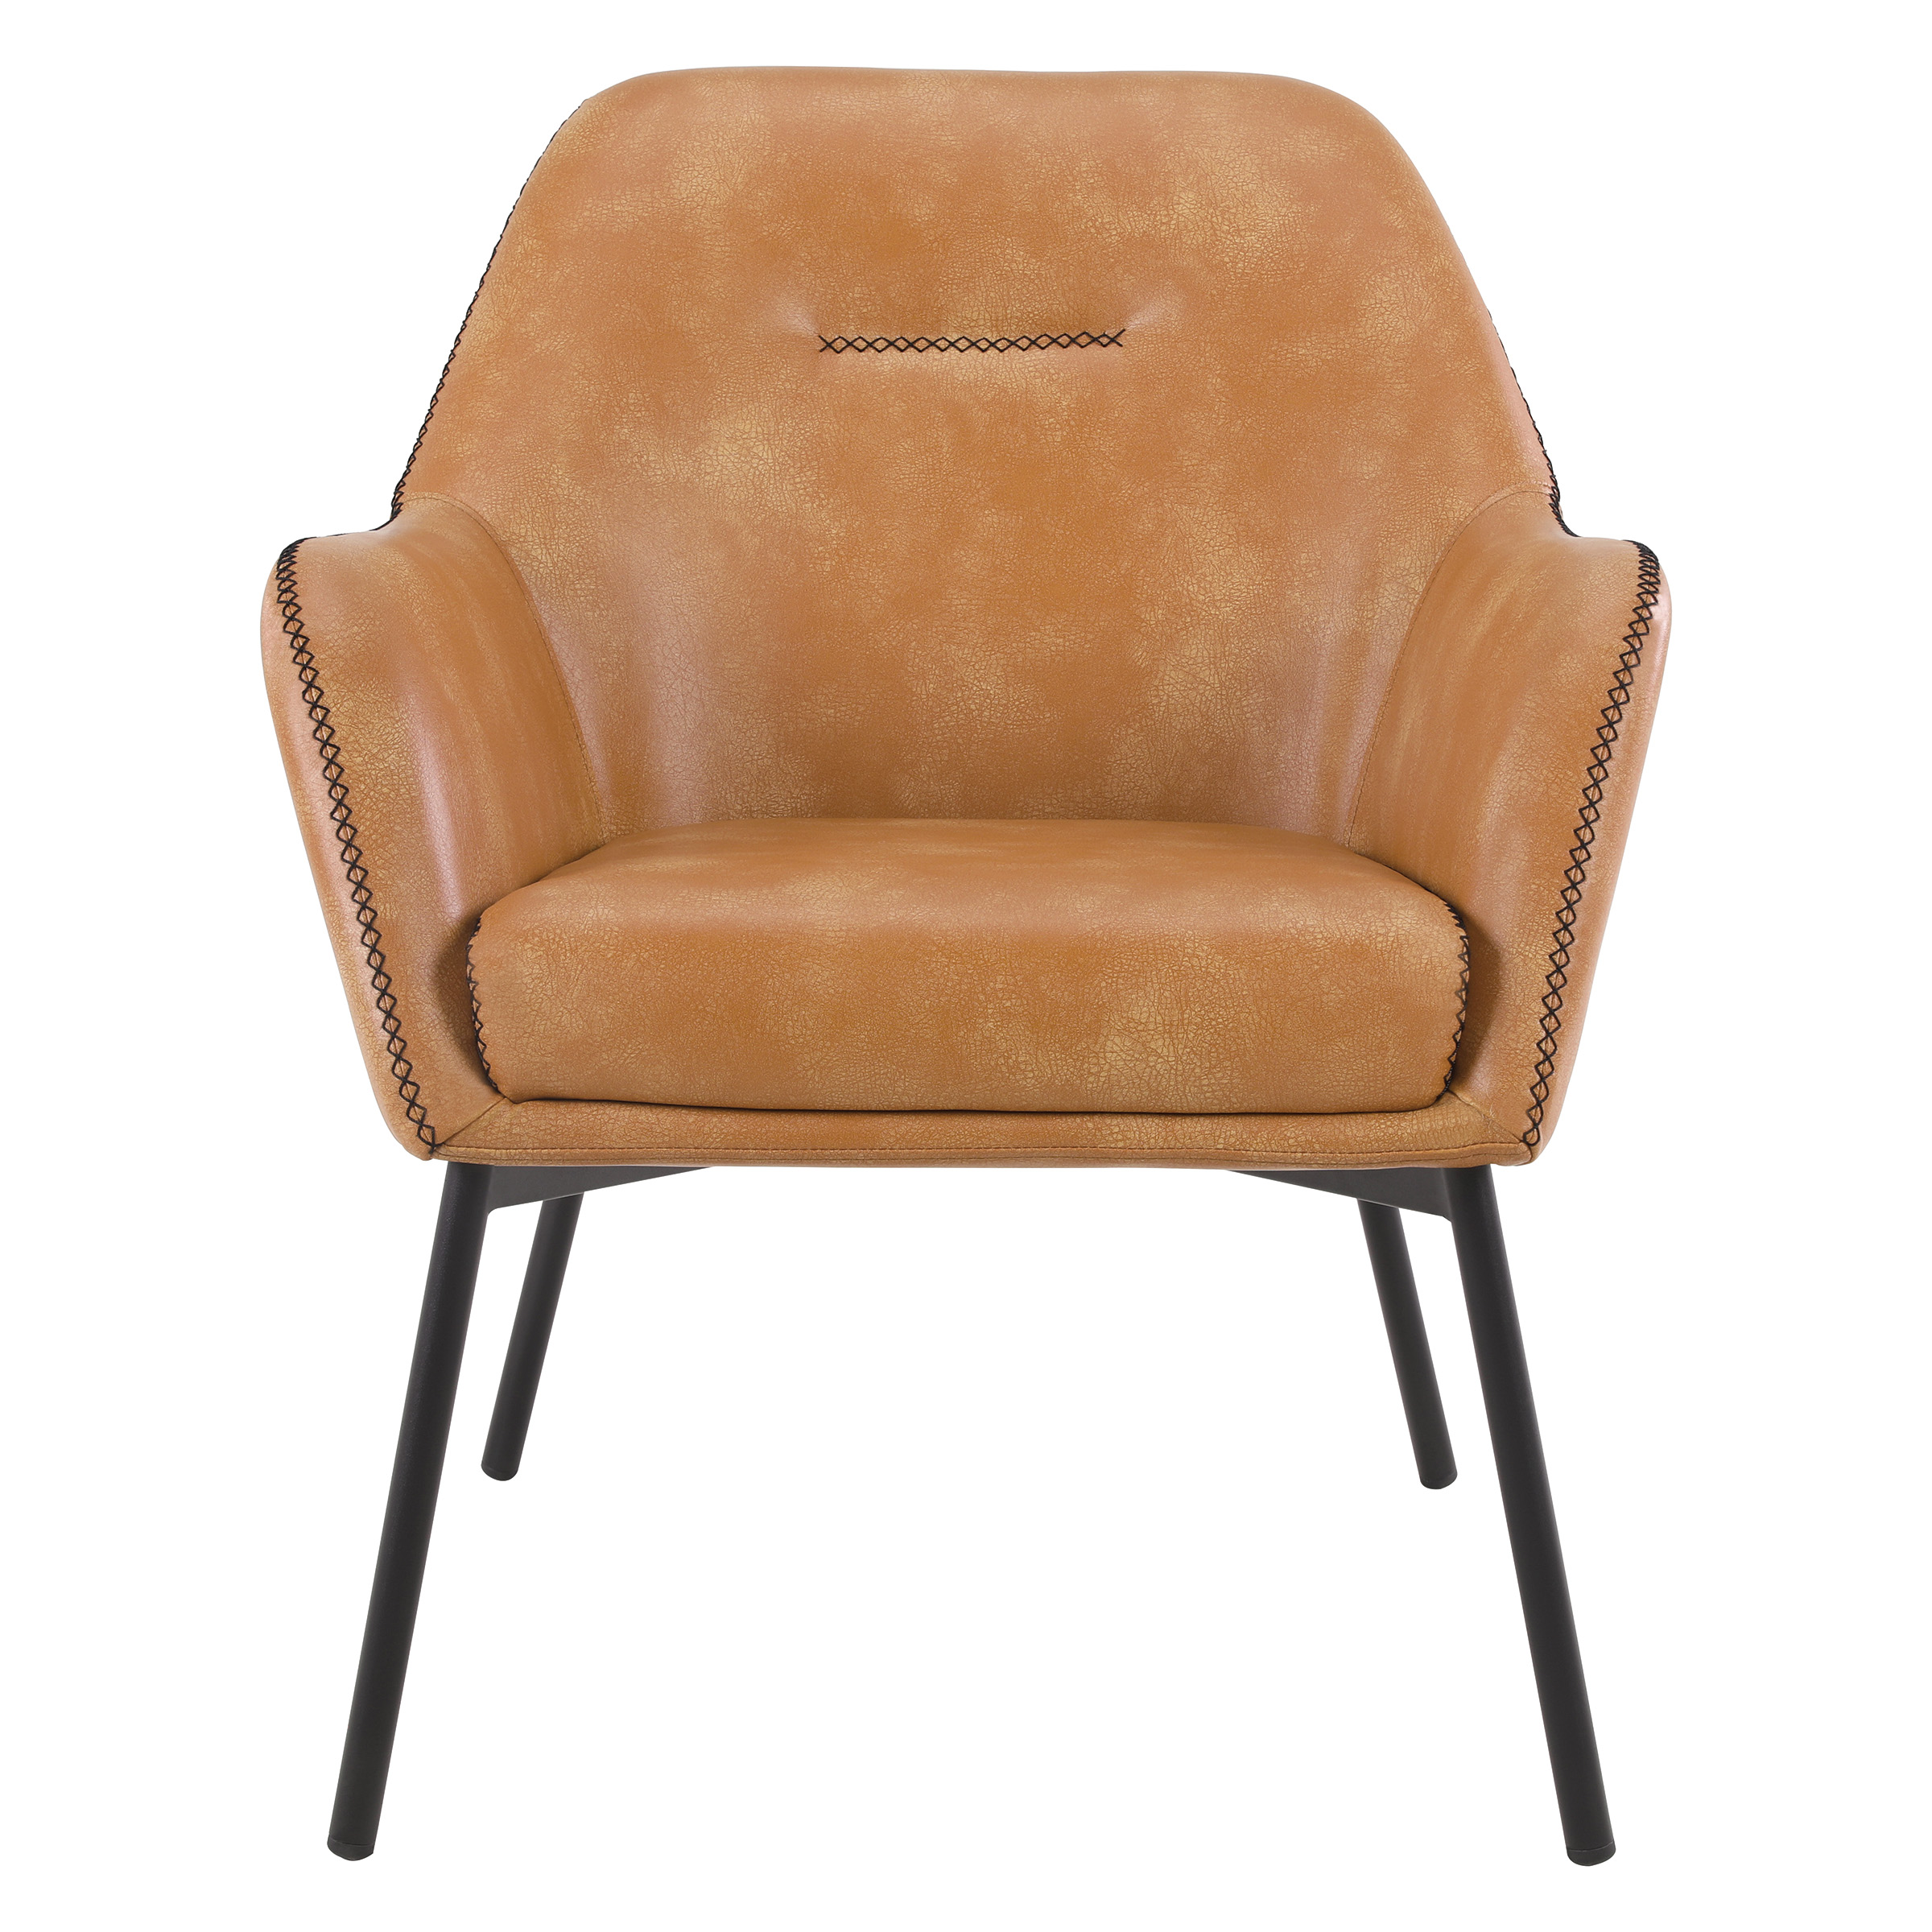 Brooks Accent Chair in Sand Brown Faux Leather with Black Stitch and Black Legs - image 4 of 9